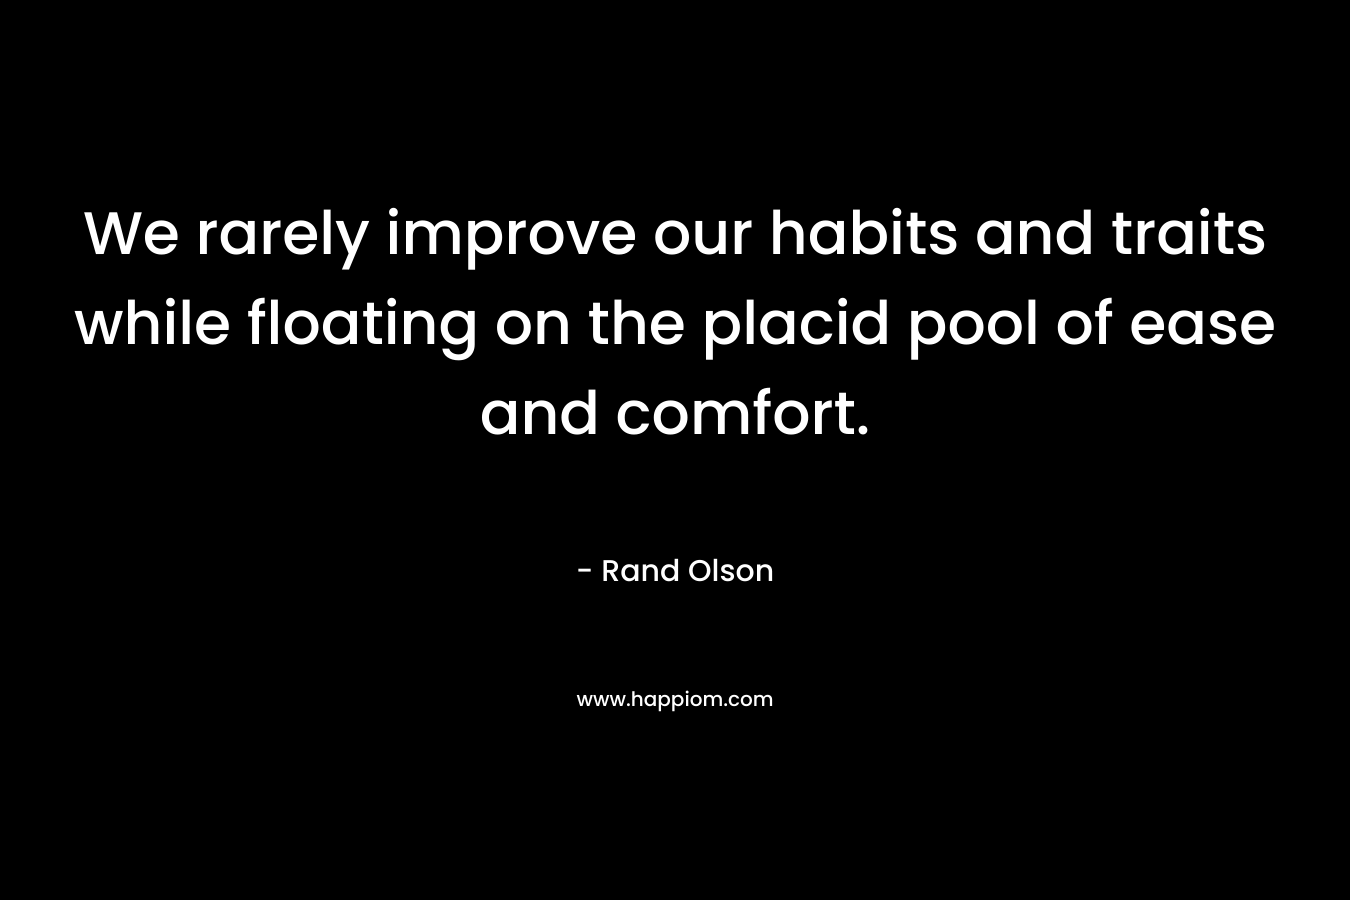 We rarely improve our habits and traits while floating on the placid pool of ease and comfort.